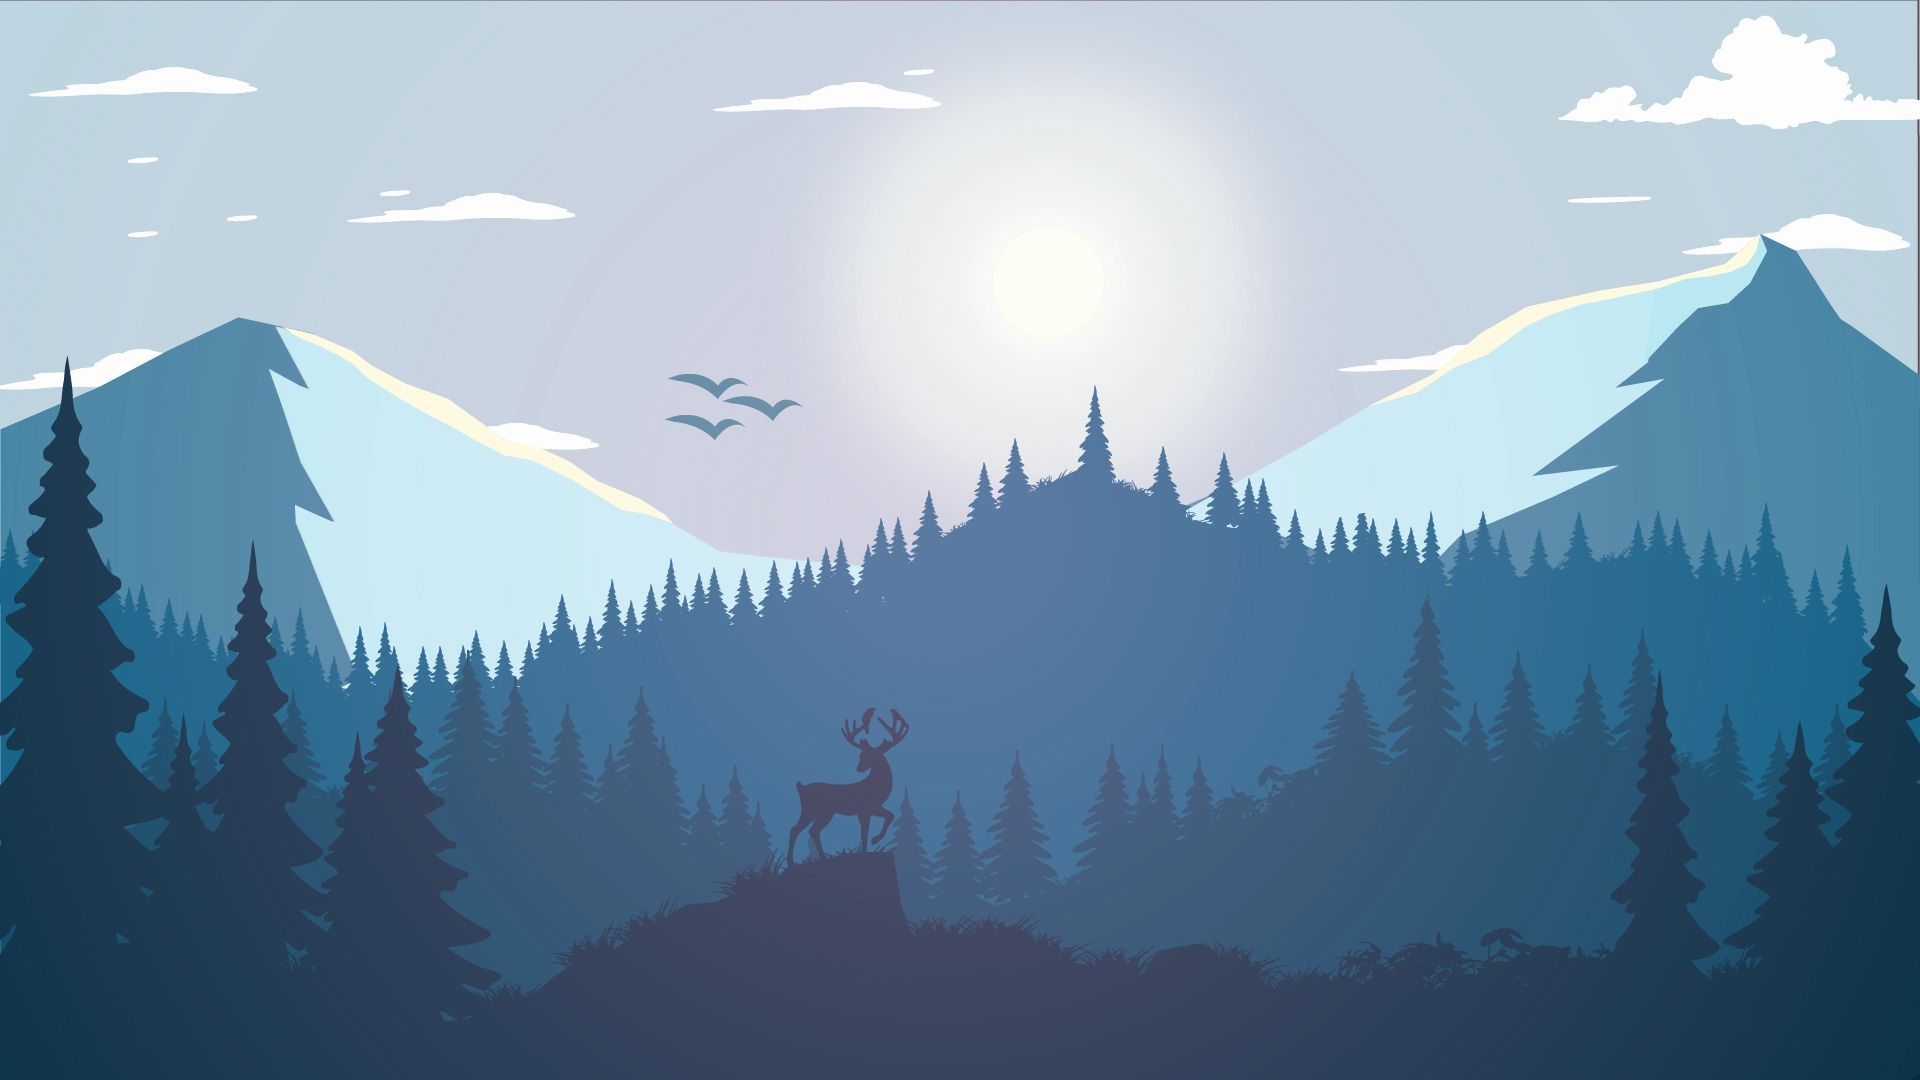 Minimalist Mountain Wallpaper HD Beautiful Landscape forest Deer Artwork Pine Trees Illustration Mountains Minimalism Animals Fire Of the Day of The Hudson